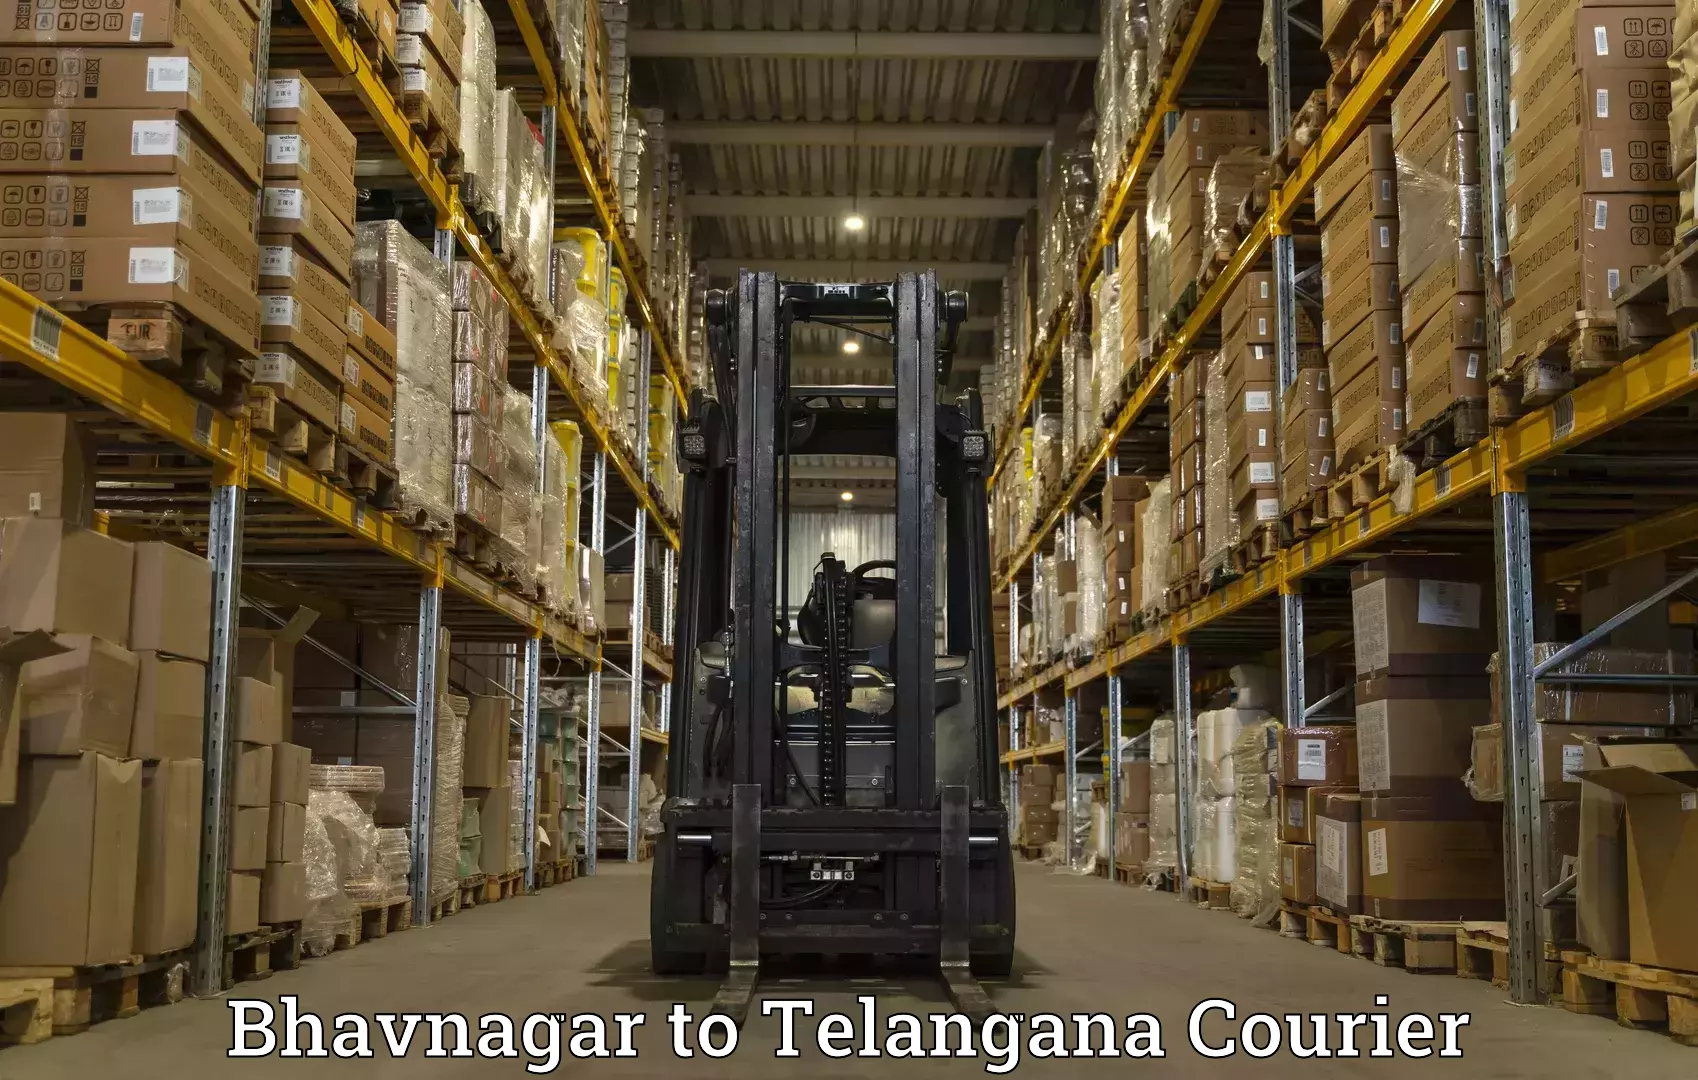 State-of-the-art courier technology Bhavnagar to Adilabad